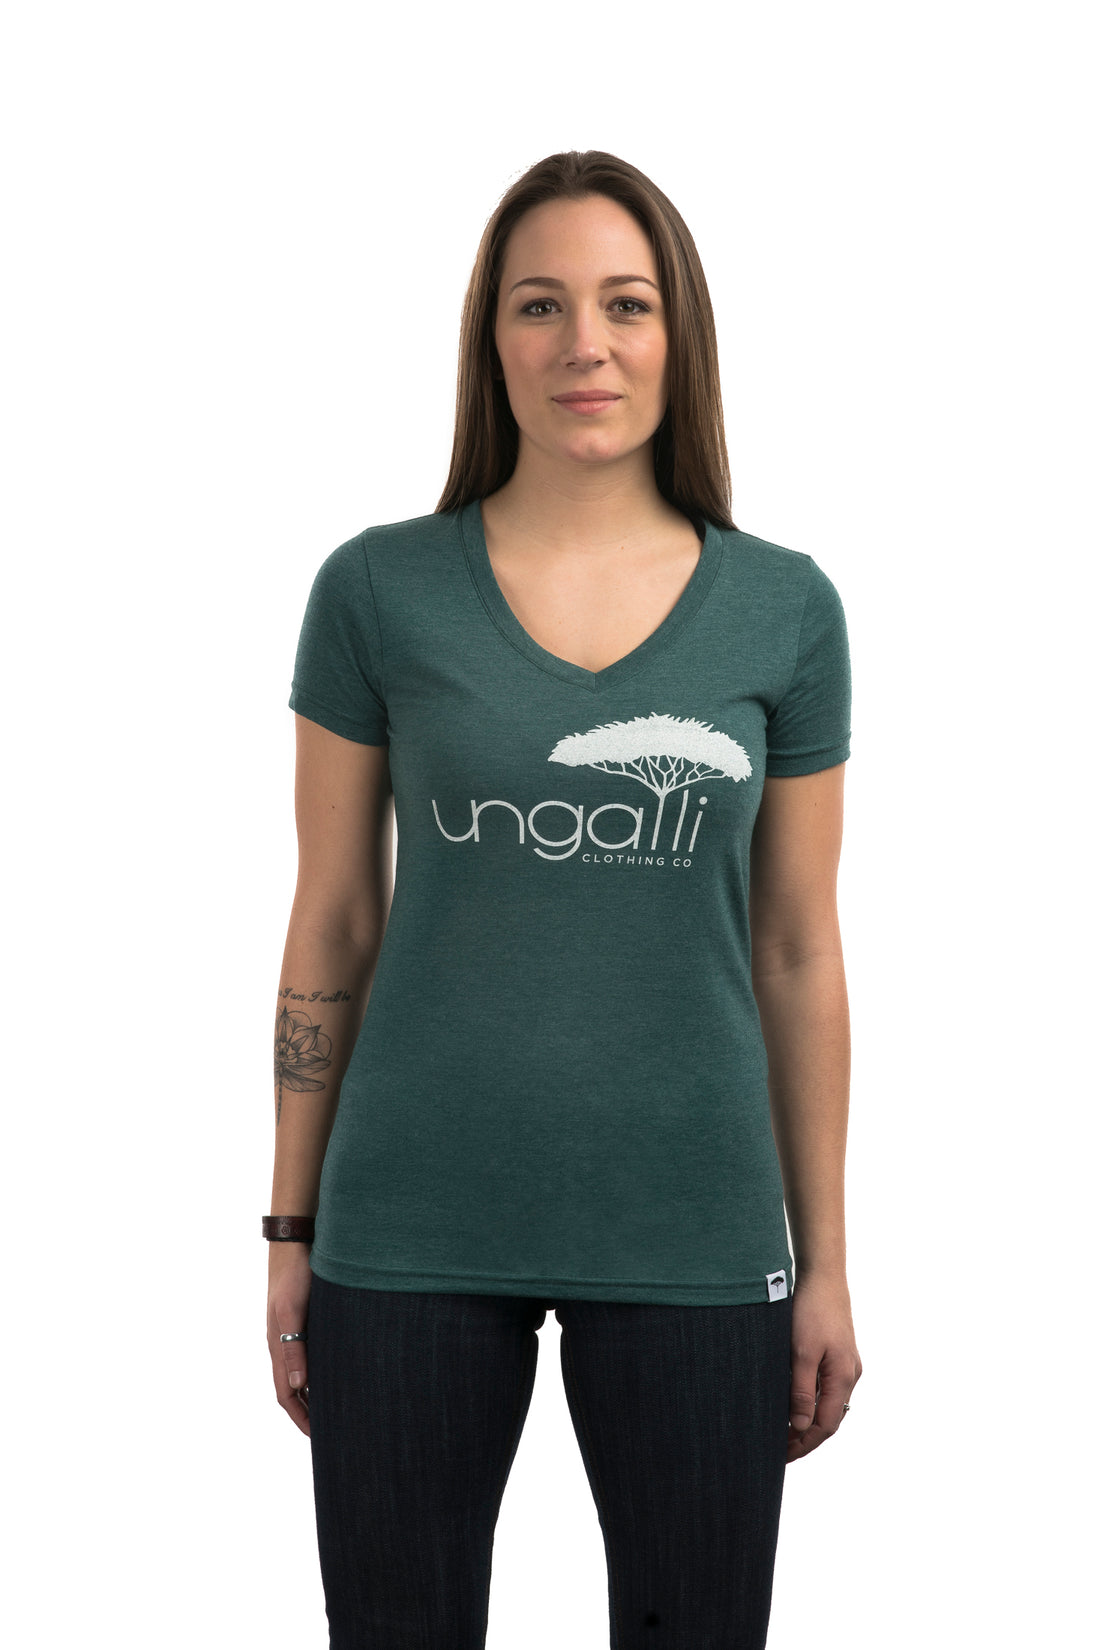 Women's short sleeve recycled t-shirt in green with white Ungalli logo on front